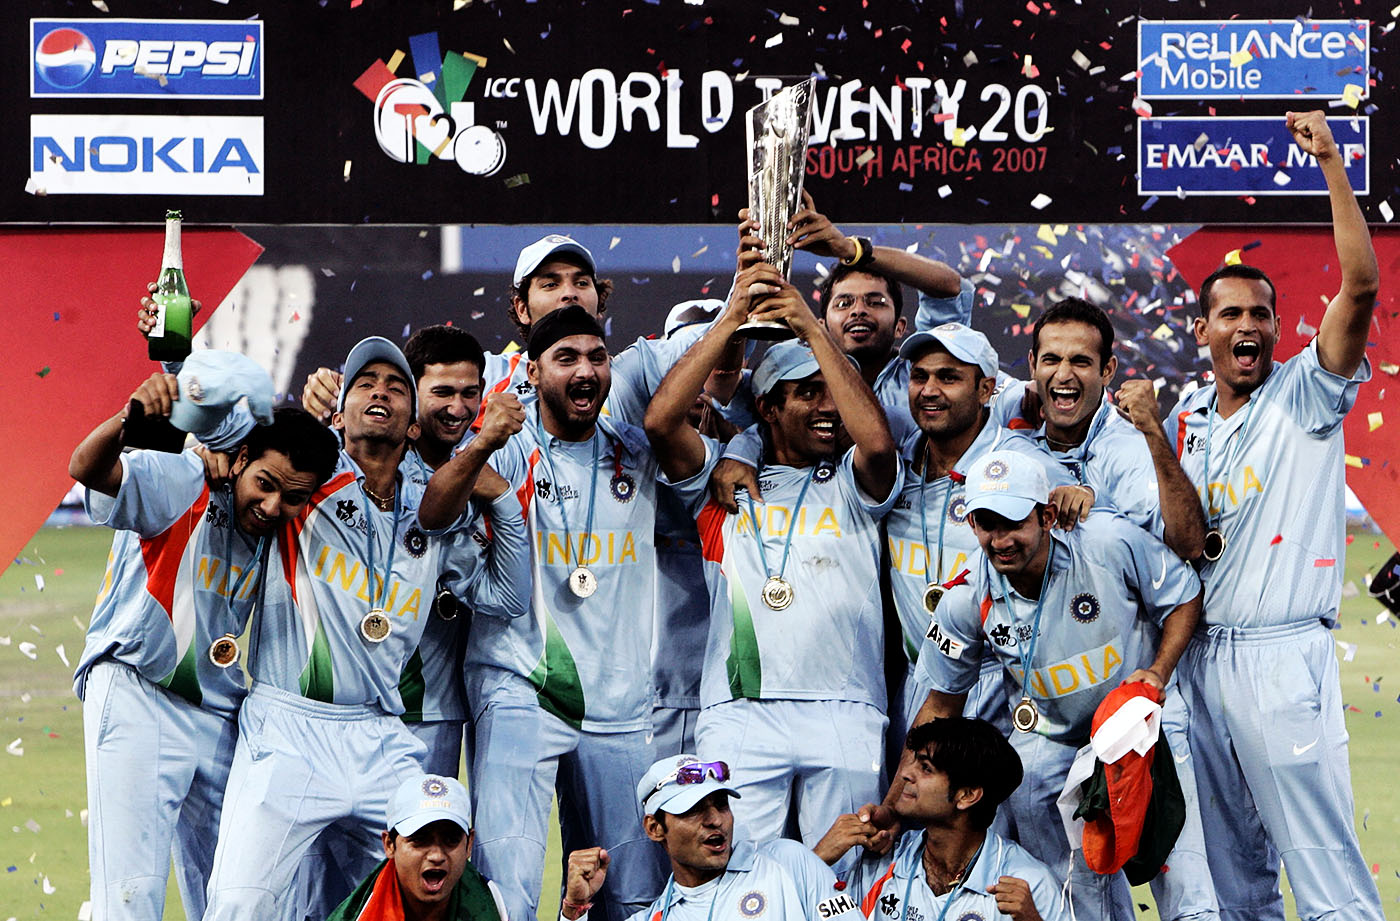 Icc World Cup Cricket Trophy. Asia Cup 2010 O.D.I Format